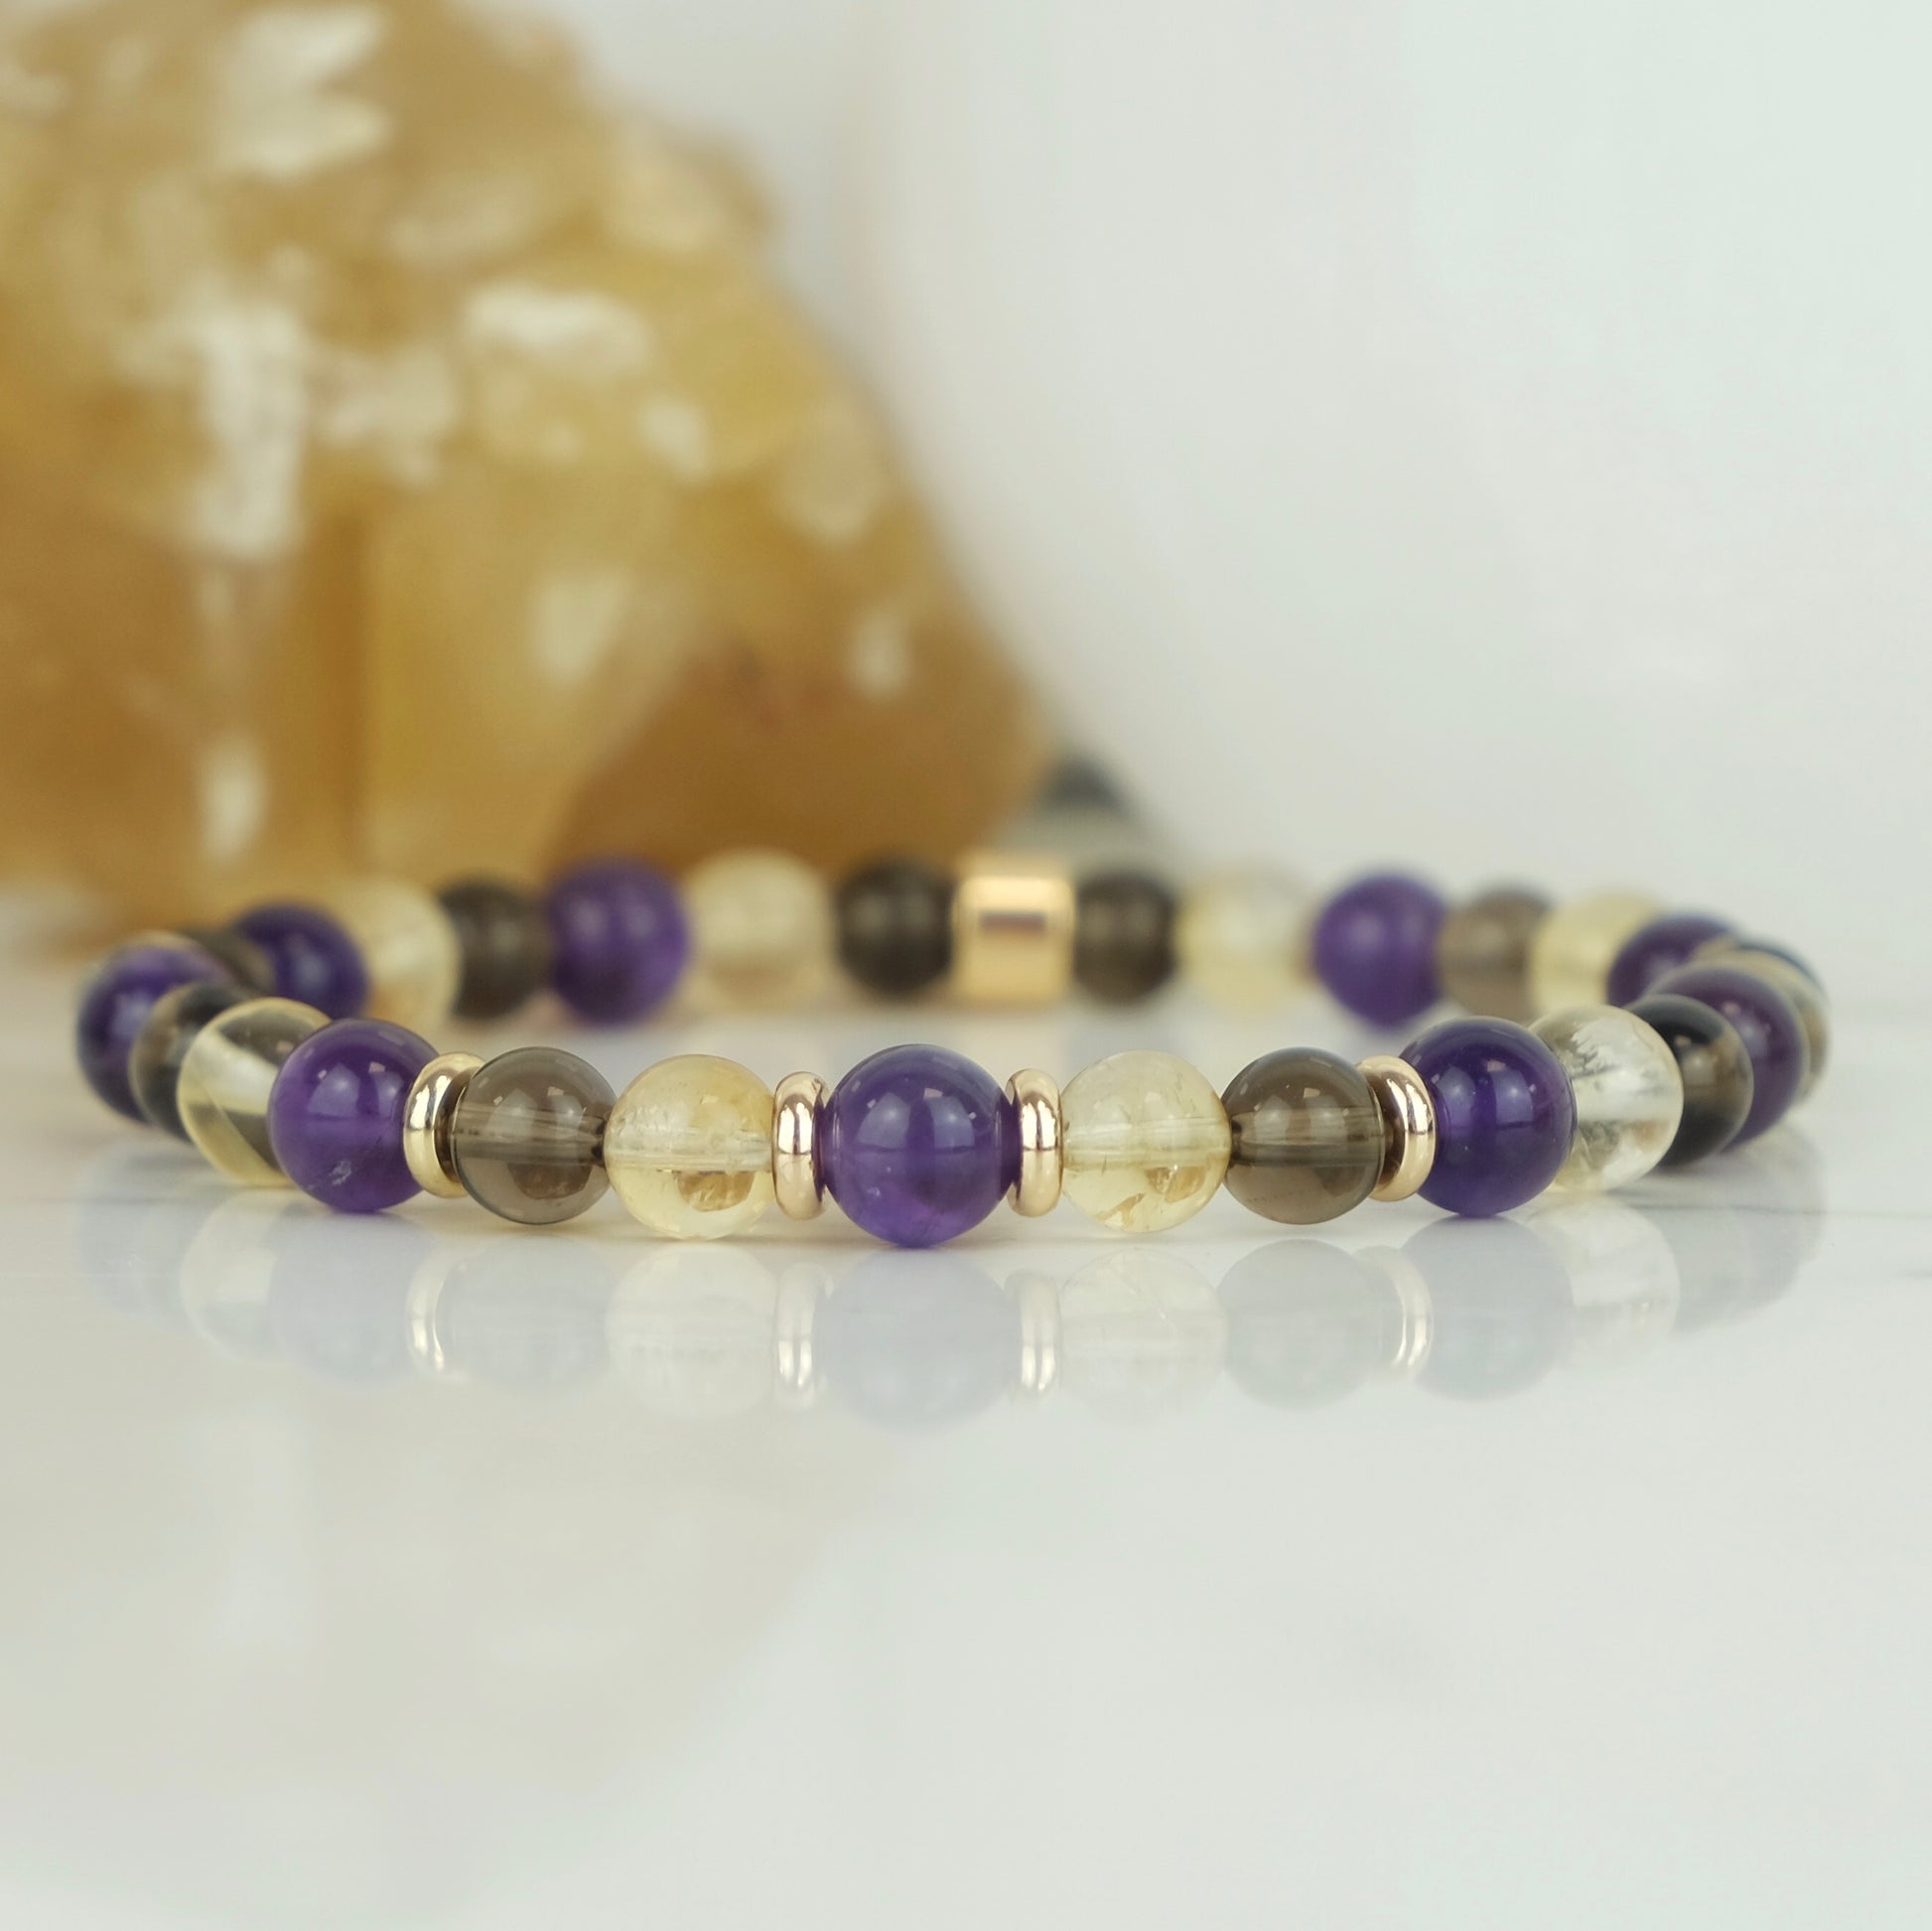 An Amethyst, citrine and smoky quartz gemstone bracelet in 6mm beads with gold accessories